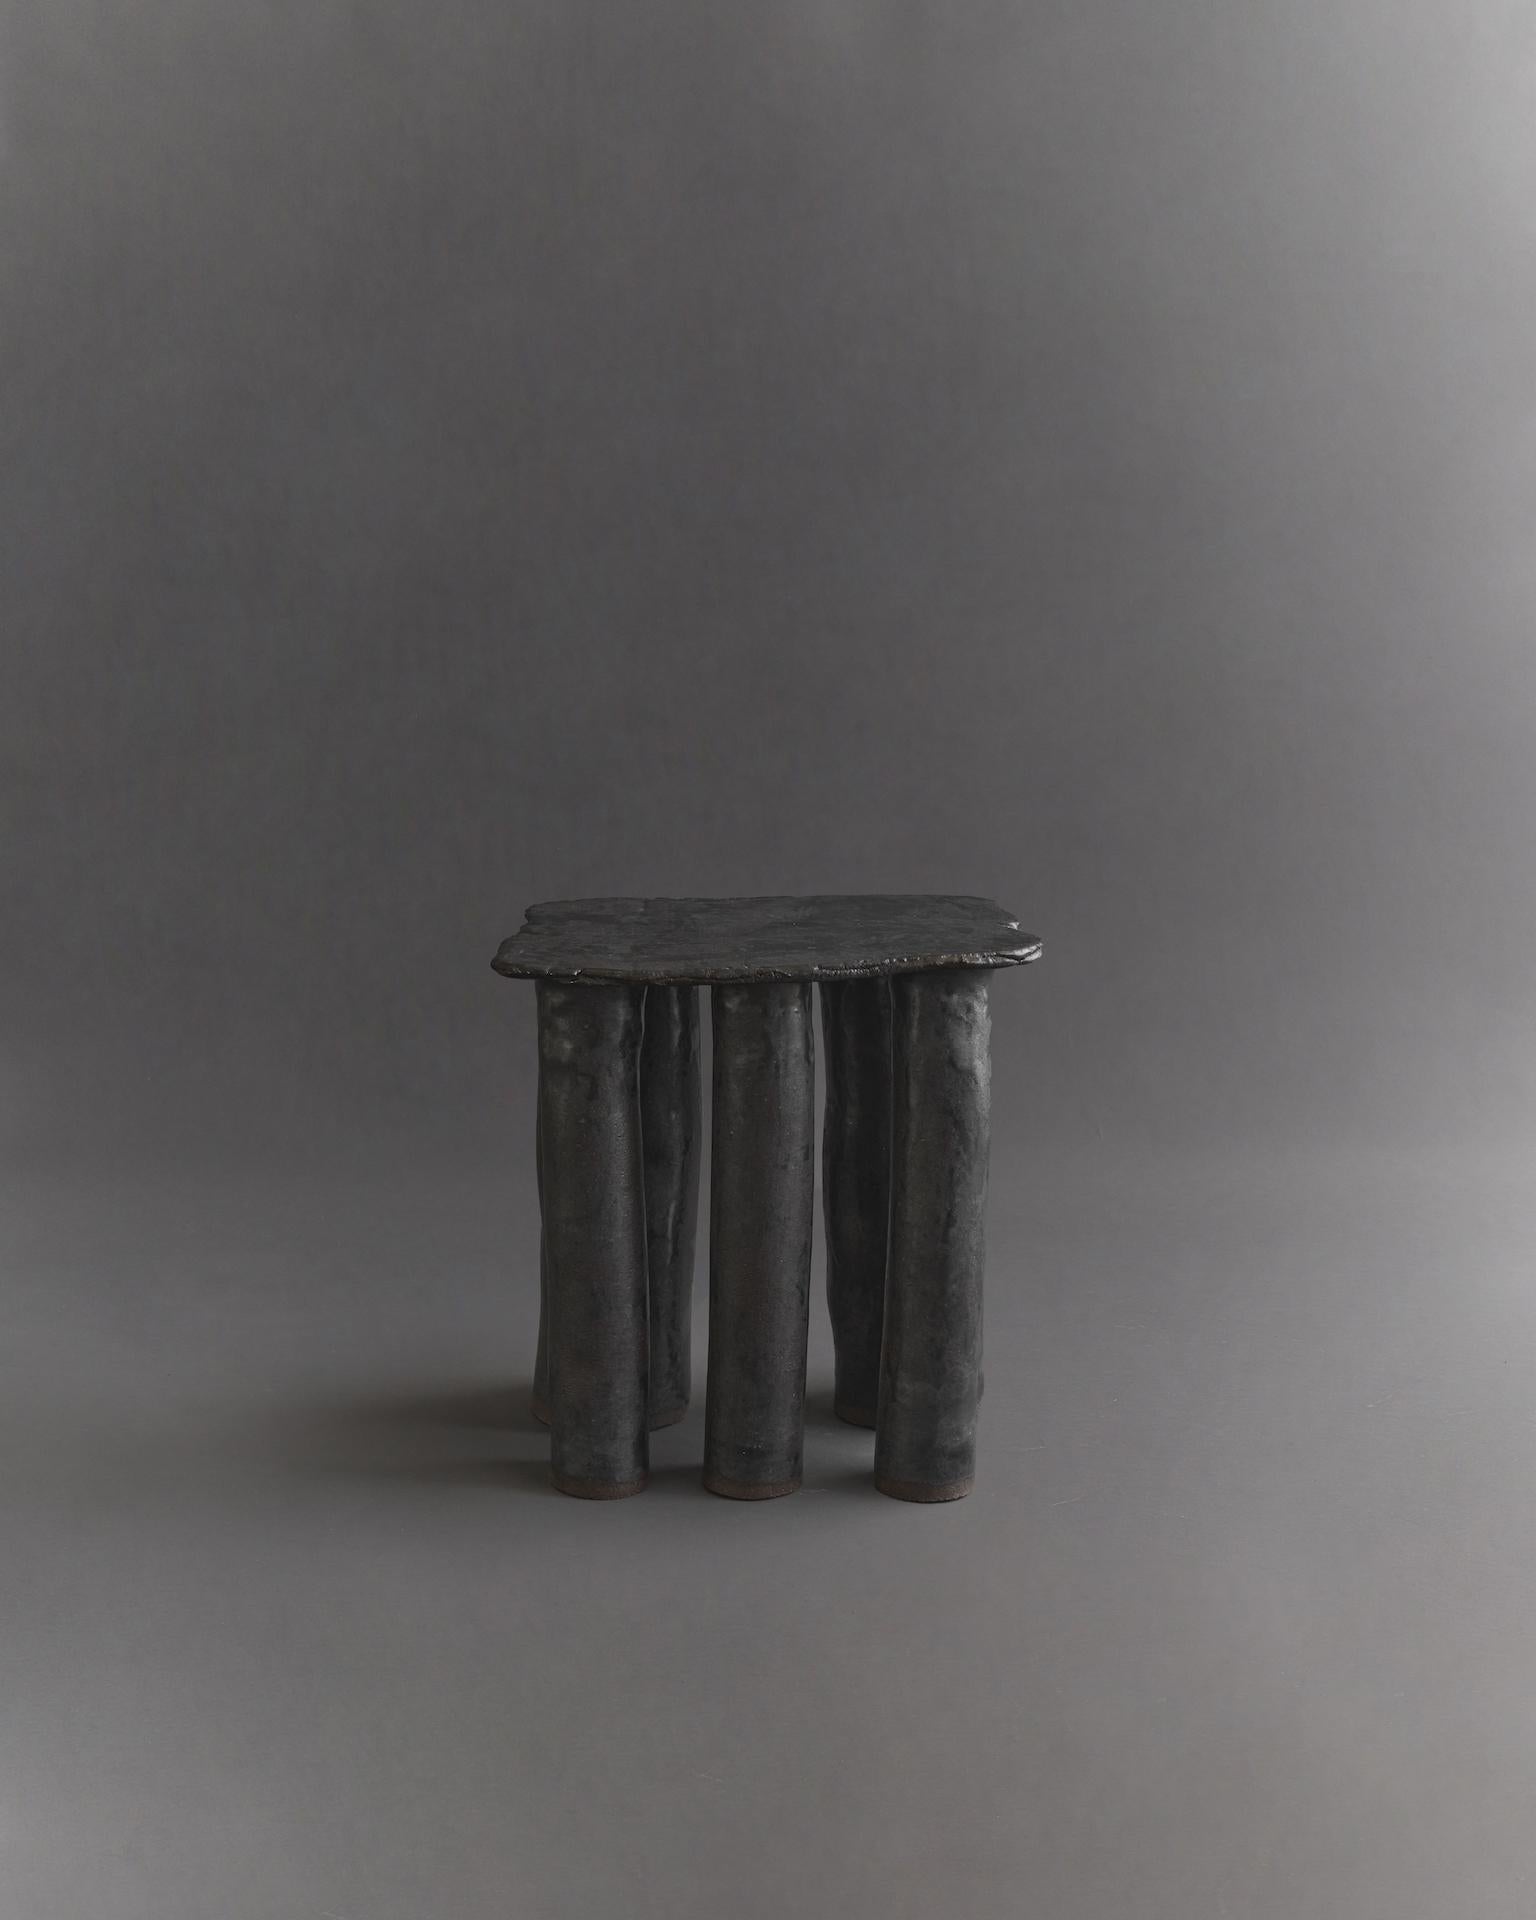 Inspired by stone slabs, this table embodies texture, organic shapes, and close attention to detail. The glaze almost has a metallic aspect to it, giving it a slight sheen. Each product is handmade to order, resulting in slight variations to the one